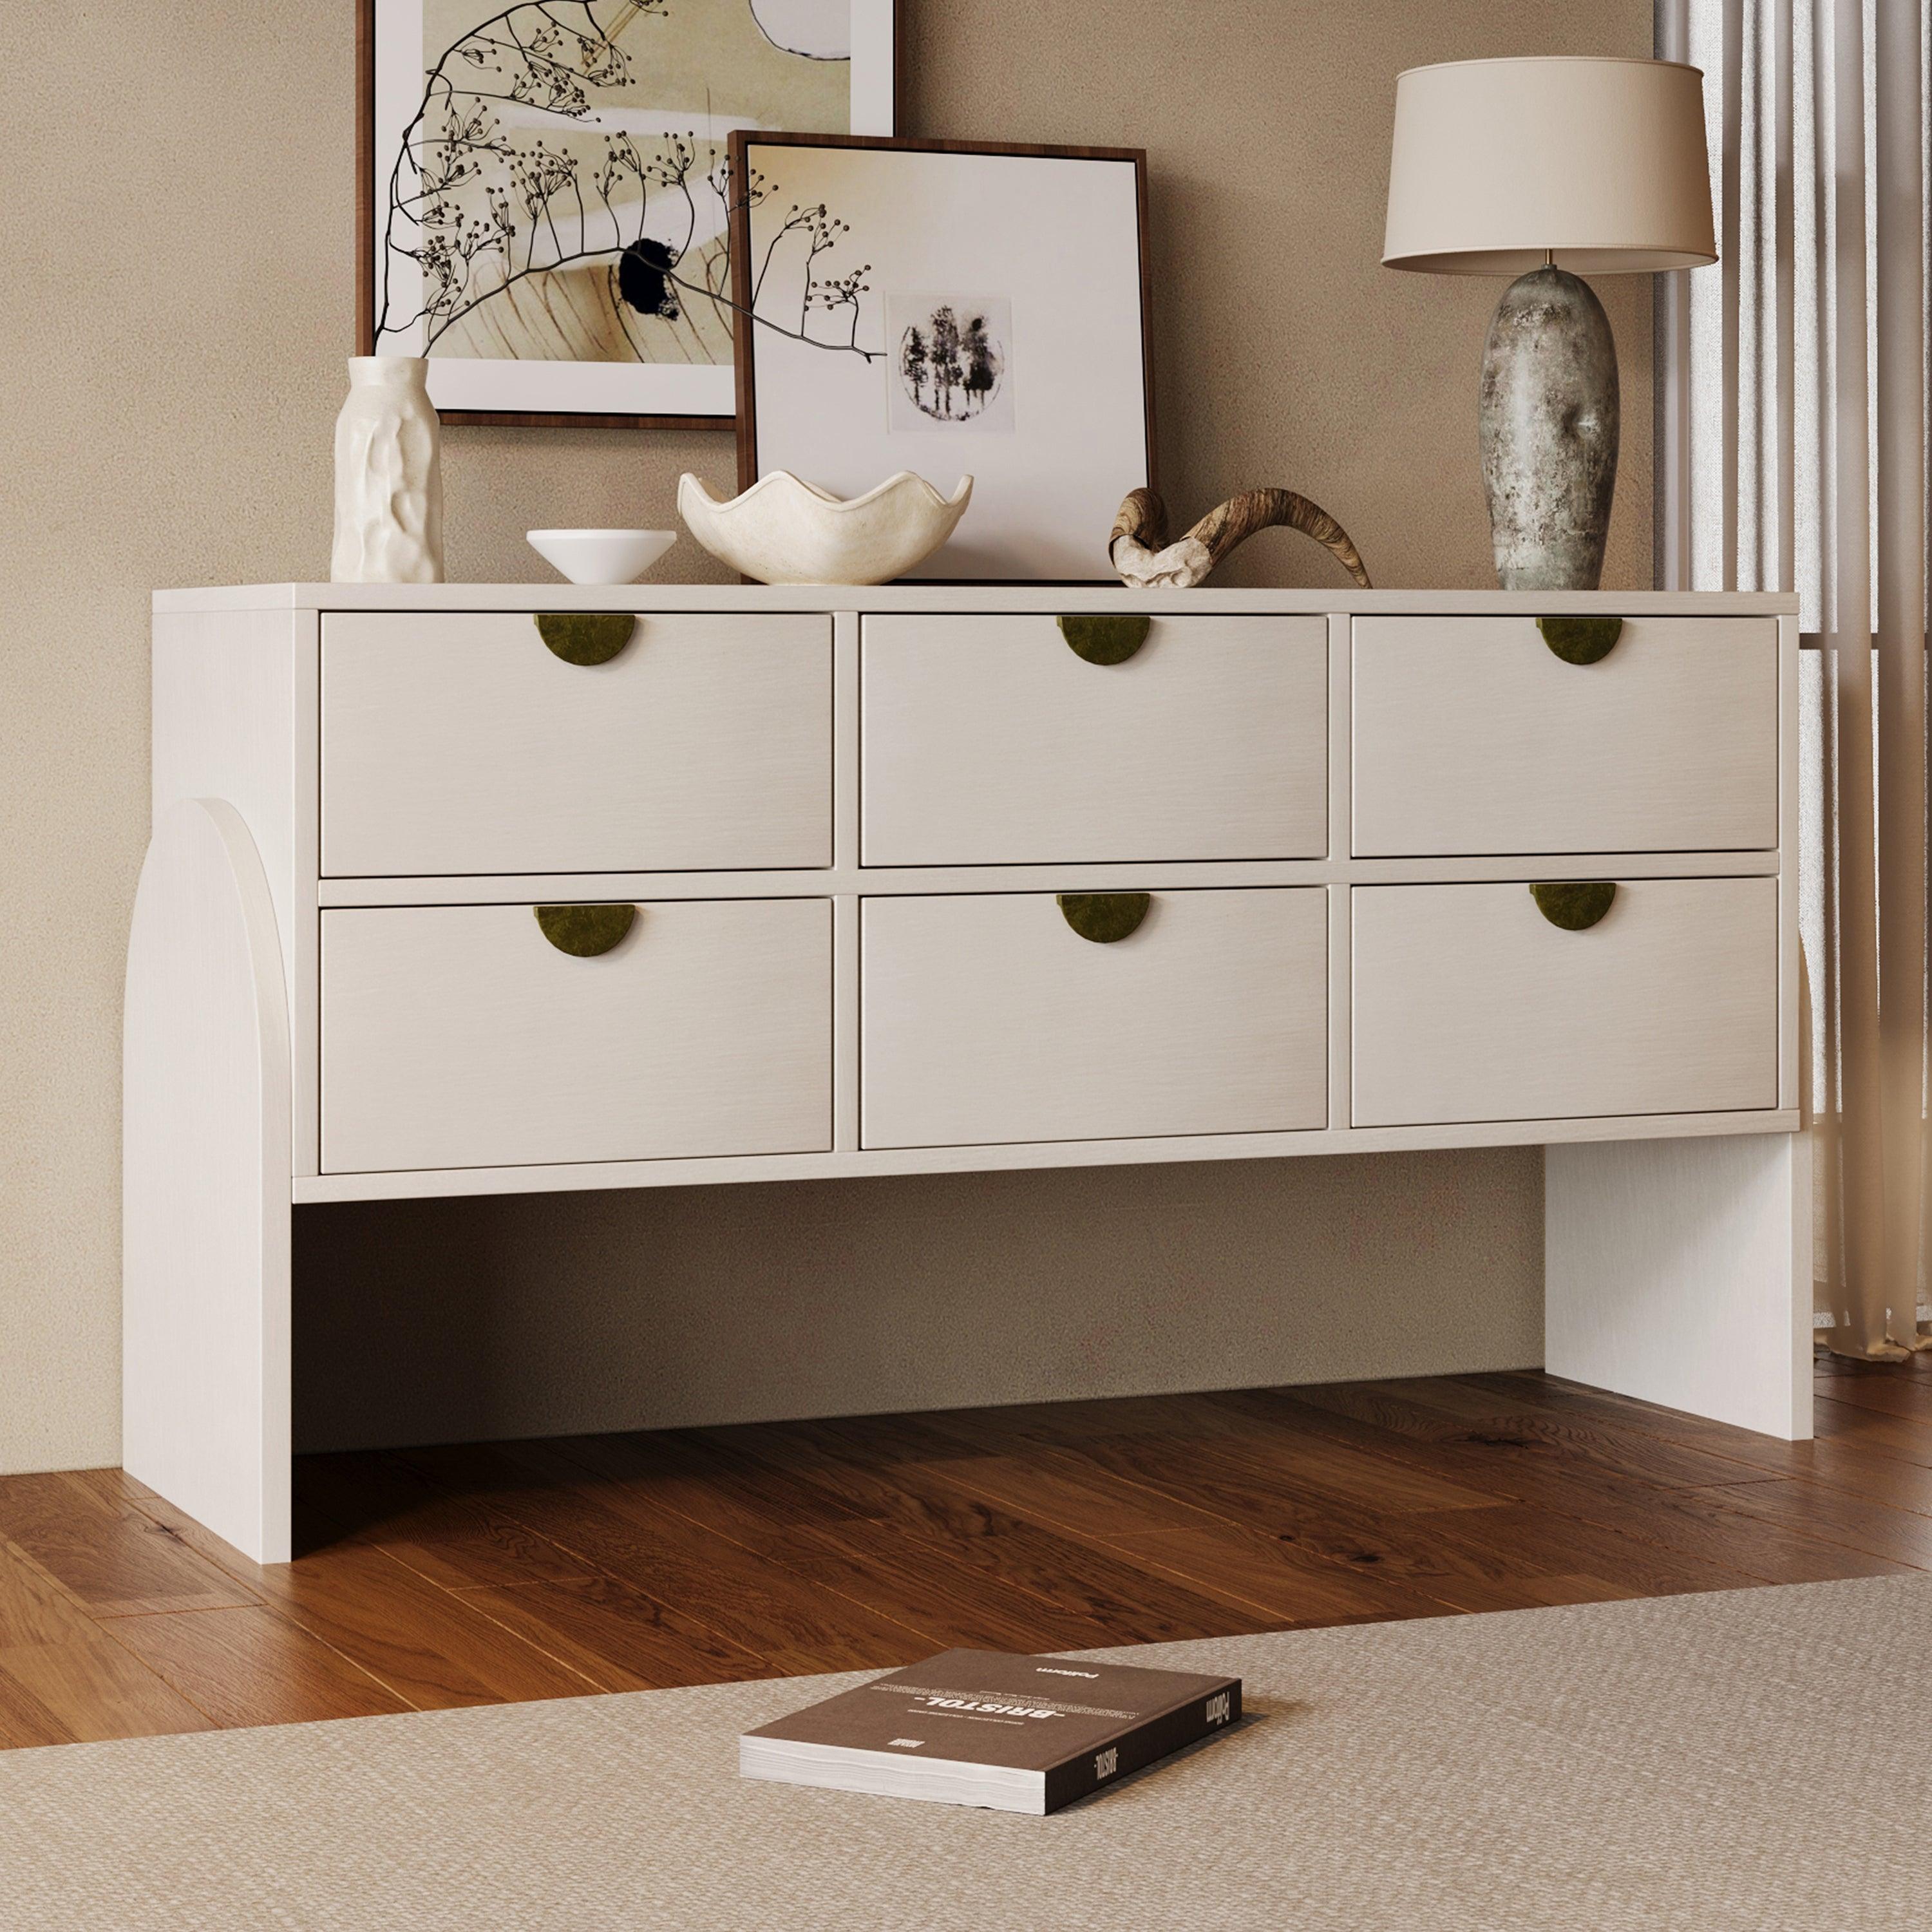 🆓🚛 Retro Style Rubber Wood Venner Three-Drawer Dresser Sideboard Cabinet Console Table - White